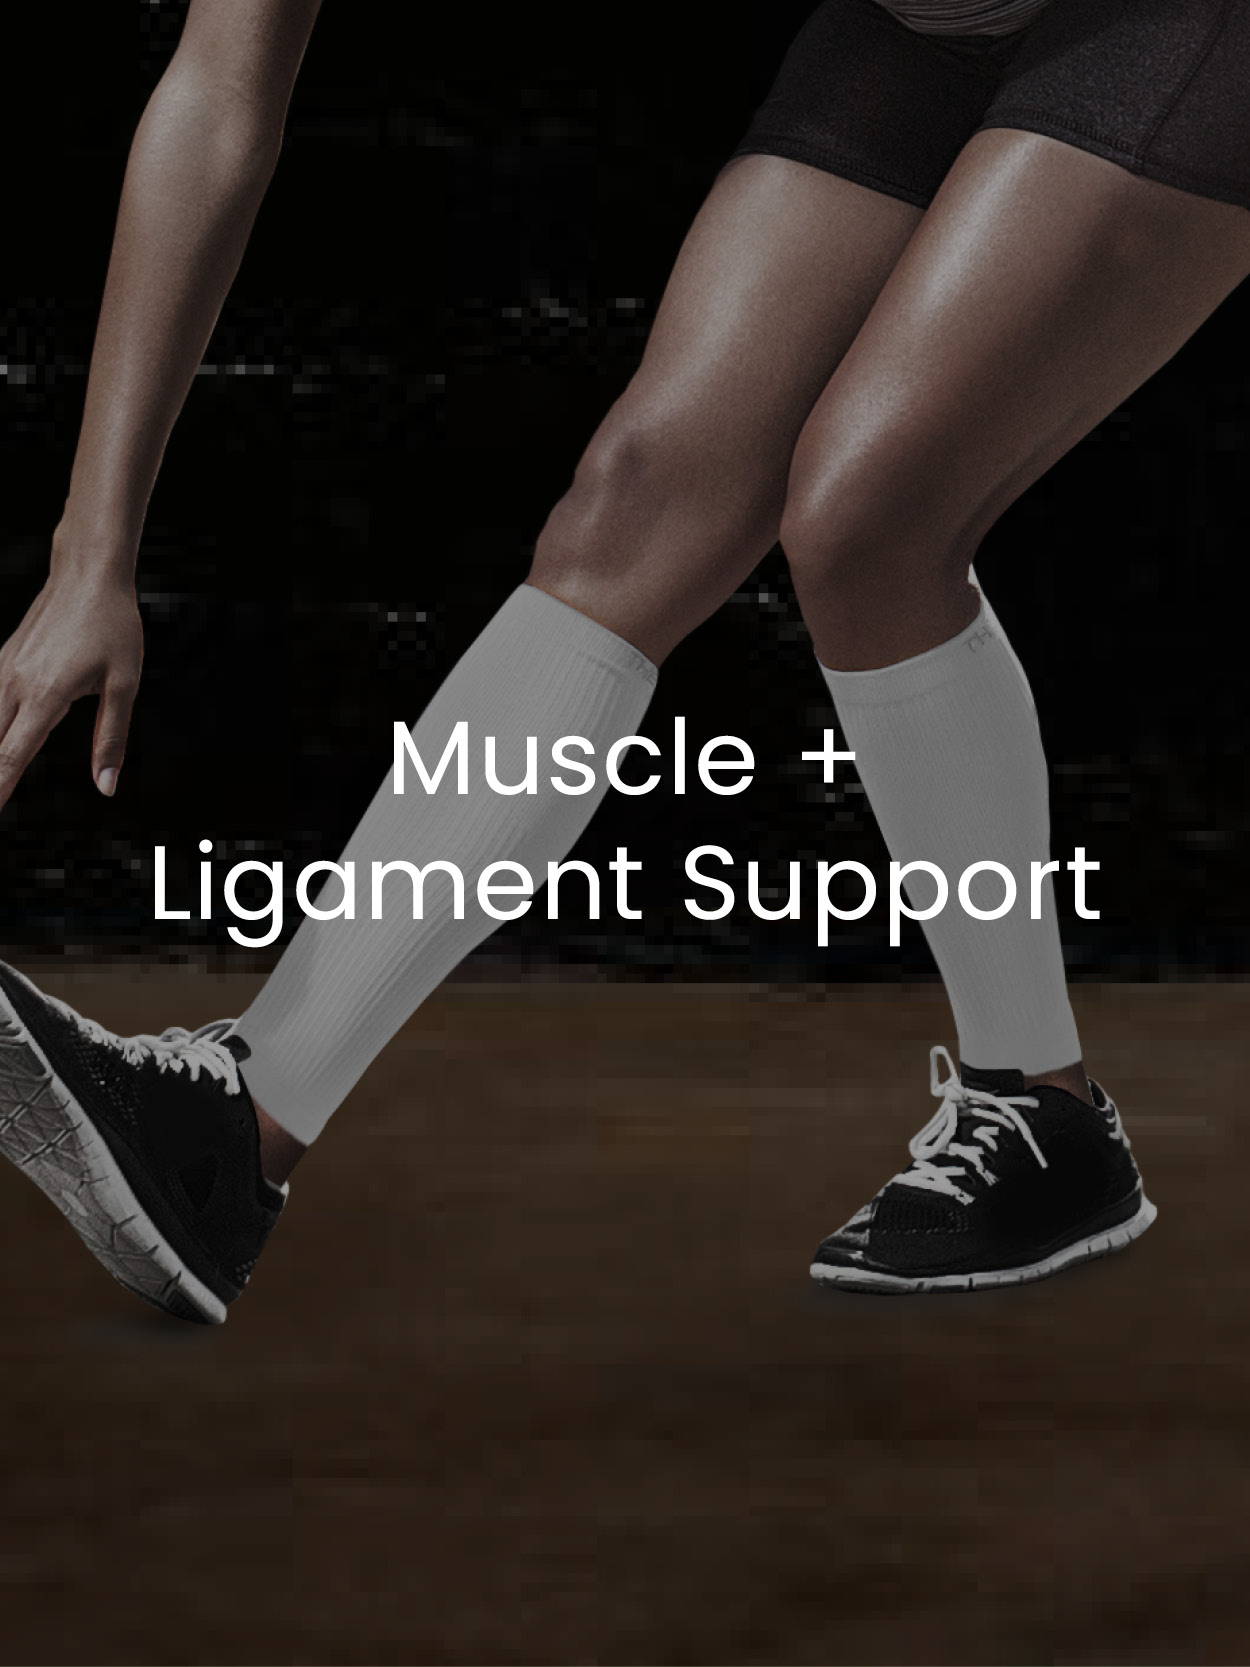 Muscle + Ligament Support